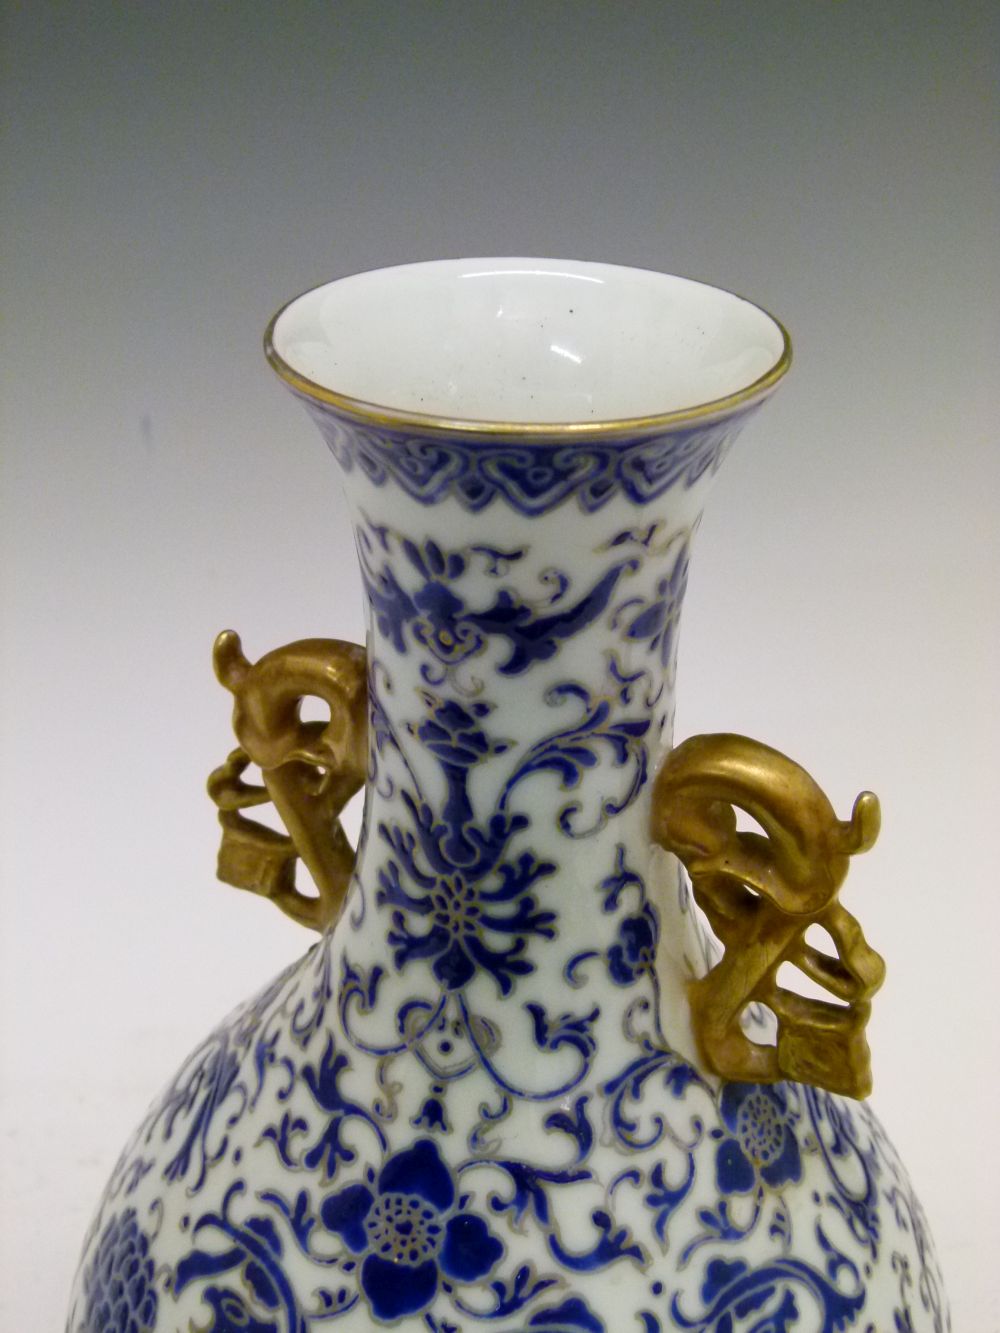 Chinese porcelain vase, of bulbous form with gilt handles and Royal blue enamel Ming-style floral - Image 5 of 10